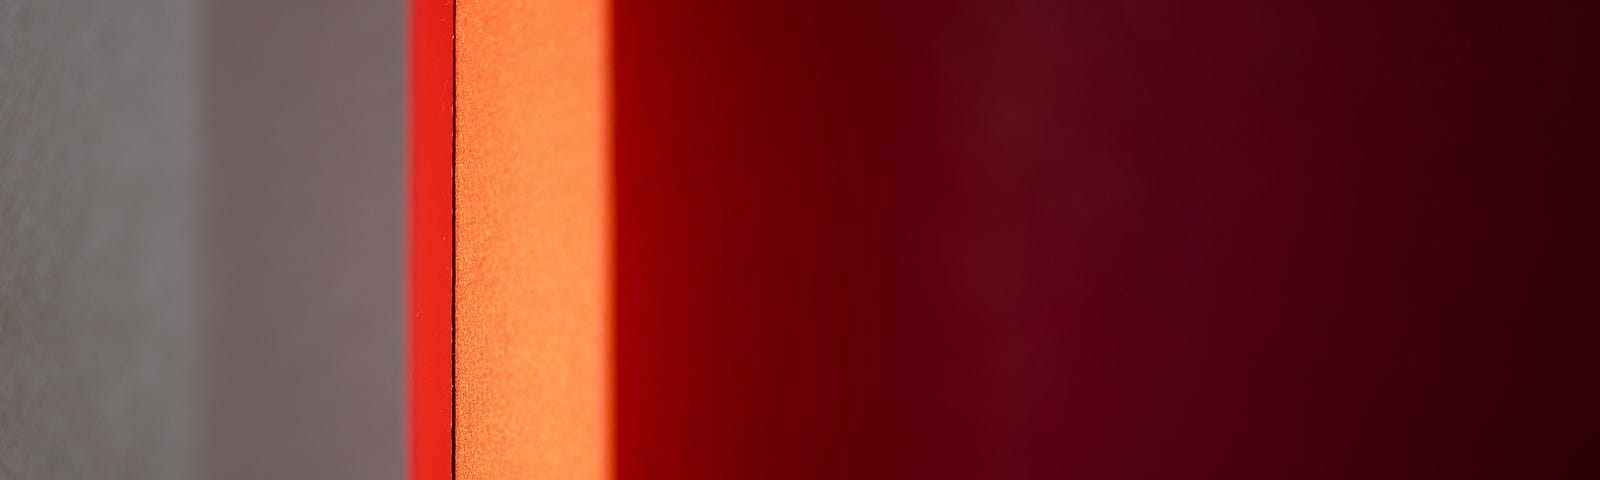 An abstract Rothko-esque image of gray, orange, and crimson